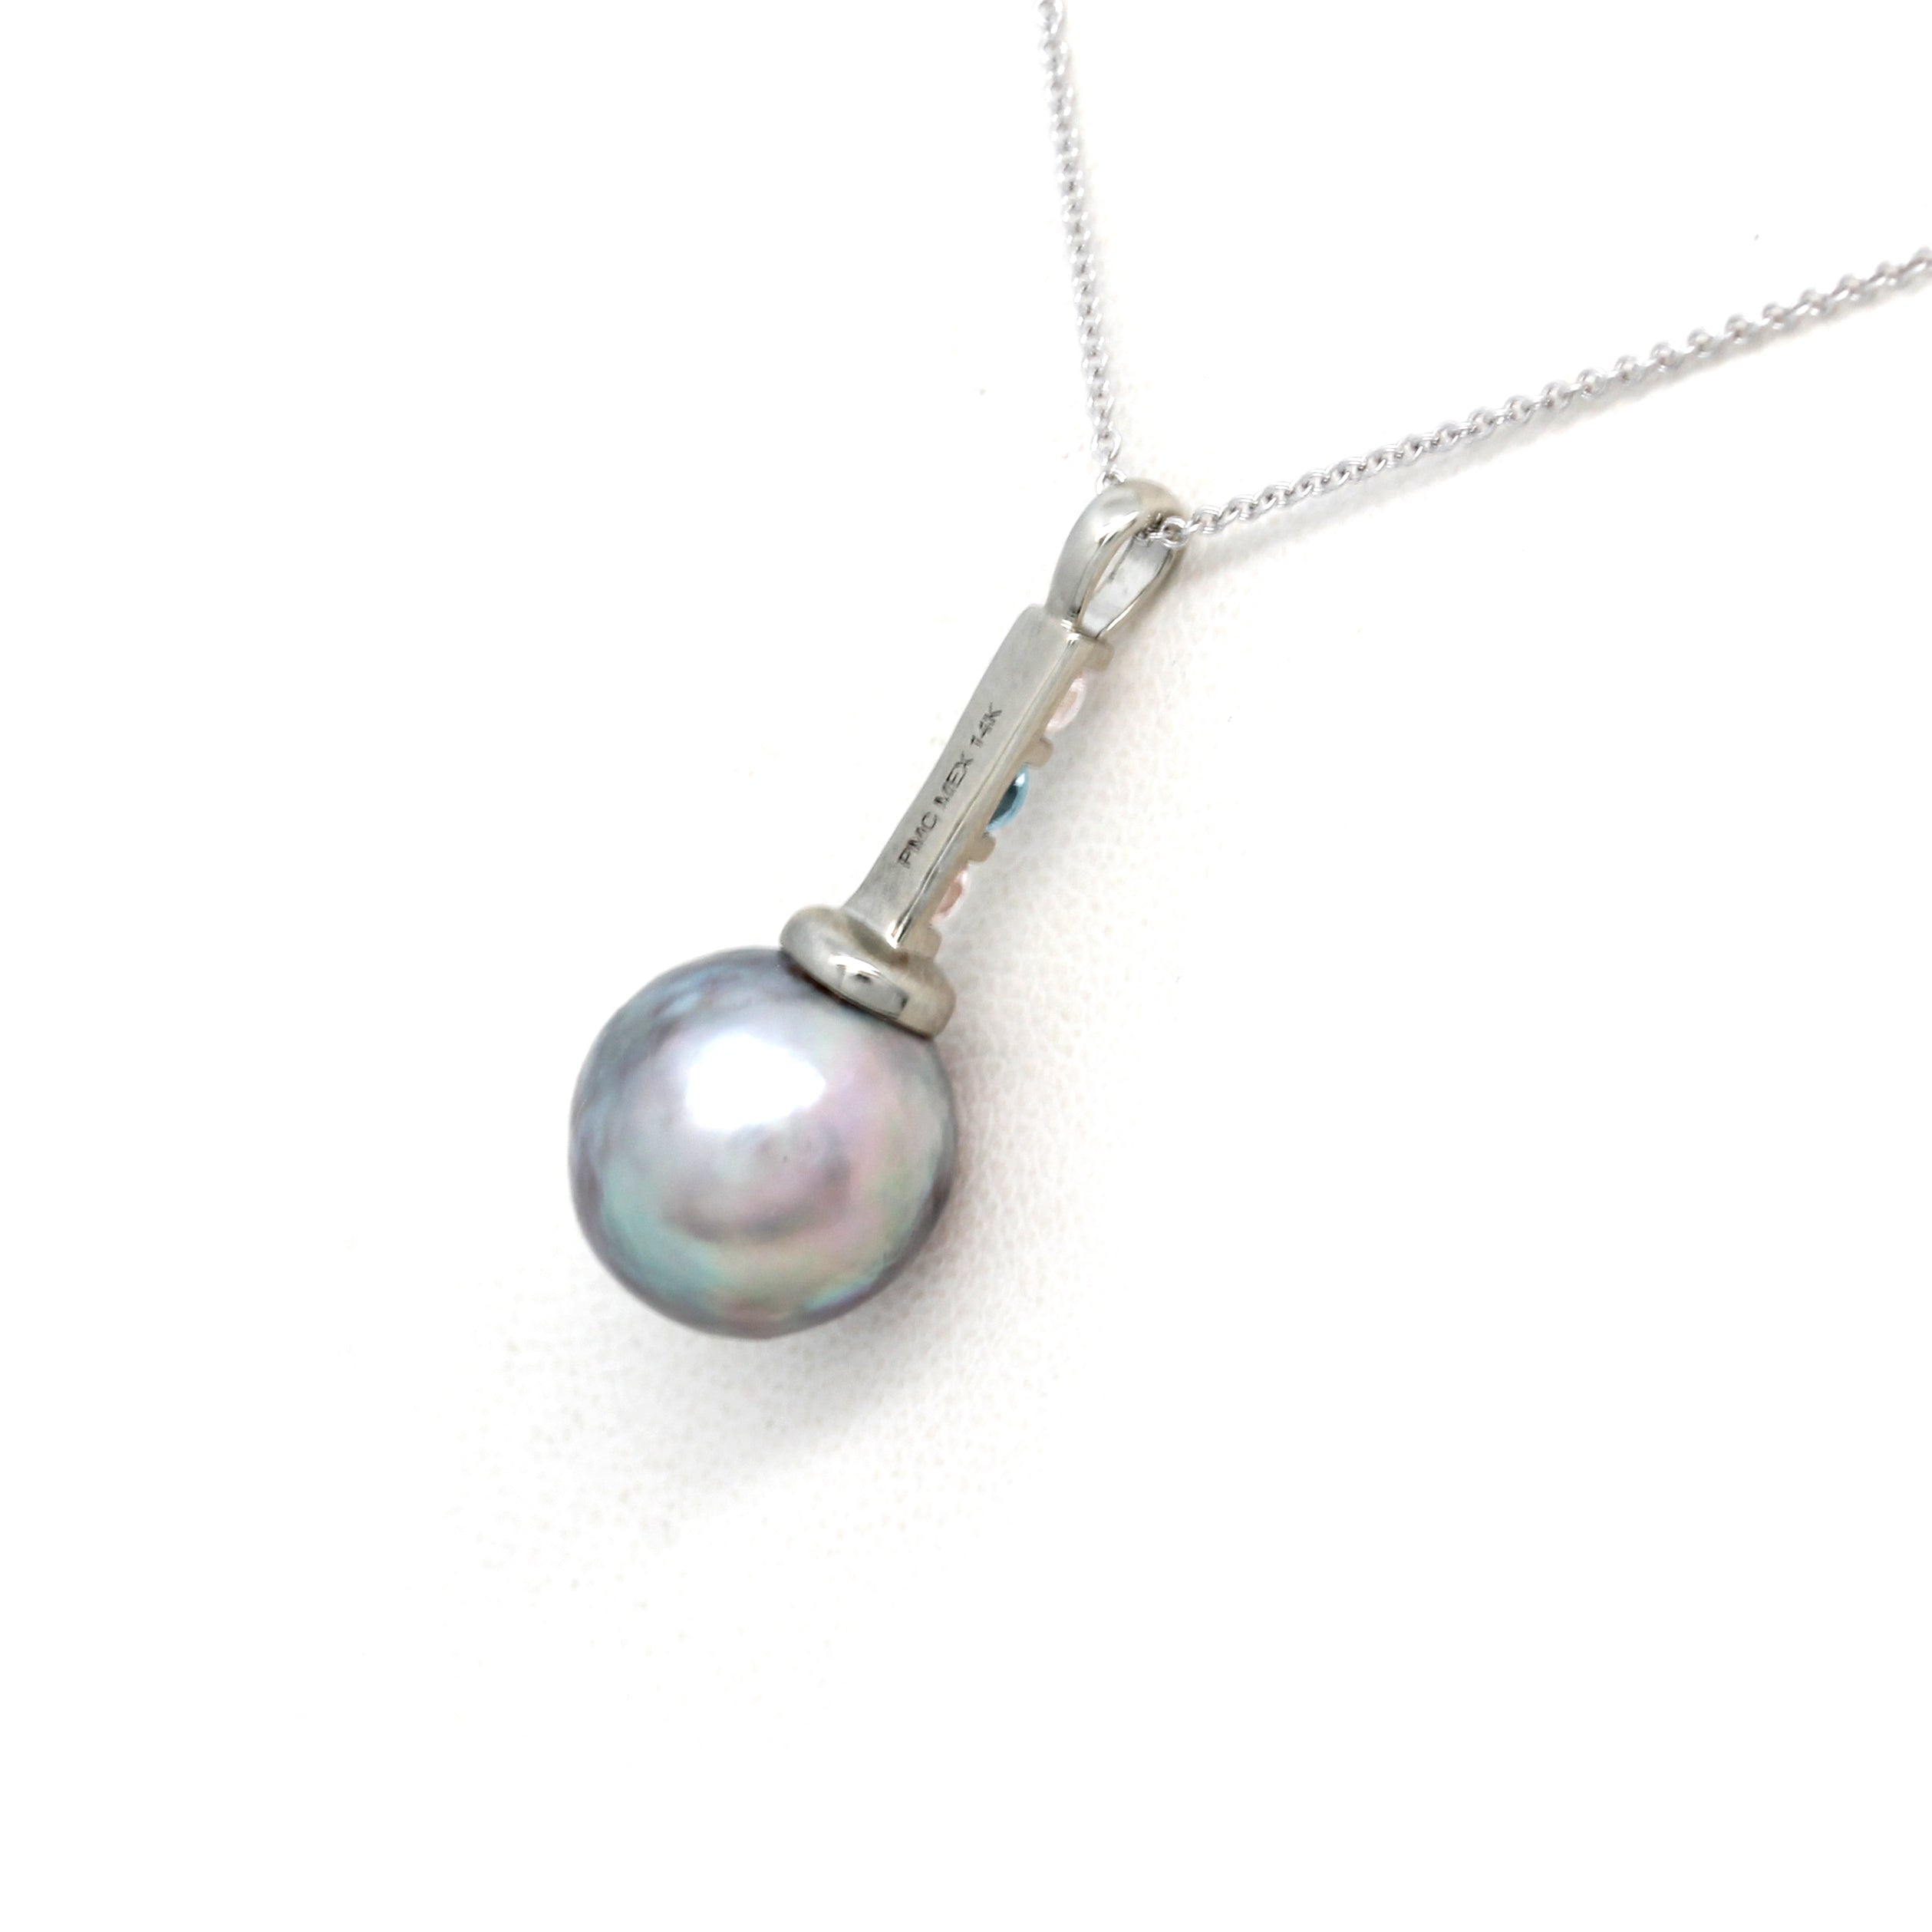 Gorgeous Pink/Green Cortez Pearl on 14K White Gold Pendant with Heliolites and Sapphire (Includes Gold Chain)